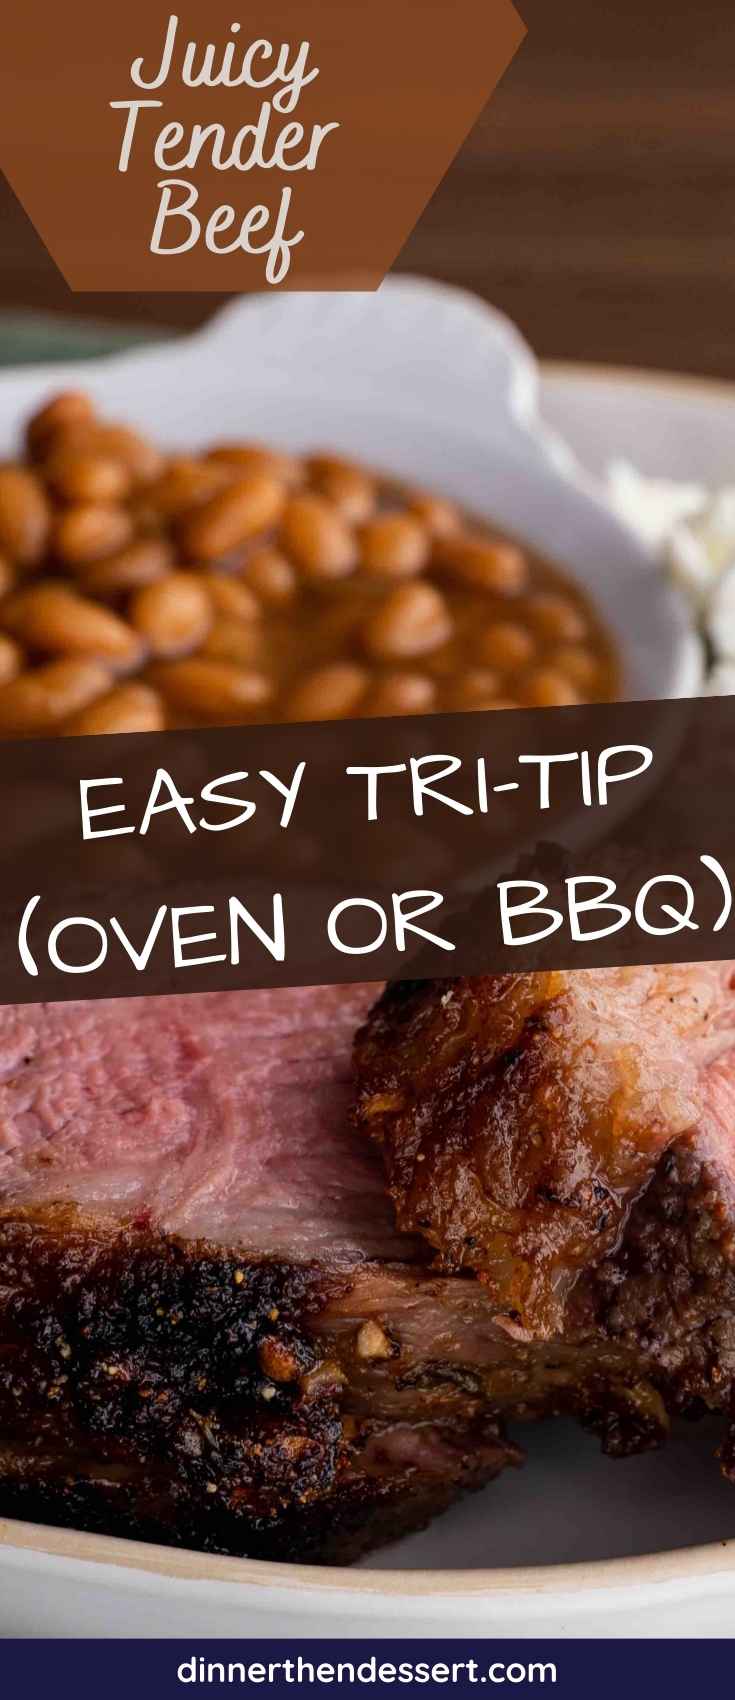 Easy Tri-Tip (Oven or BBQ) pin 1